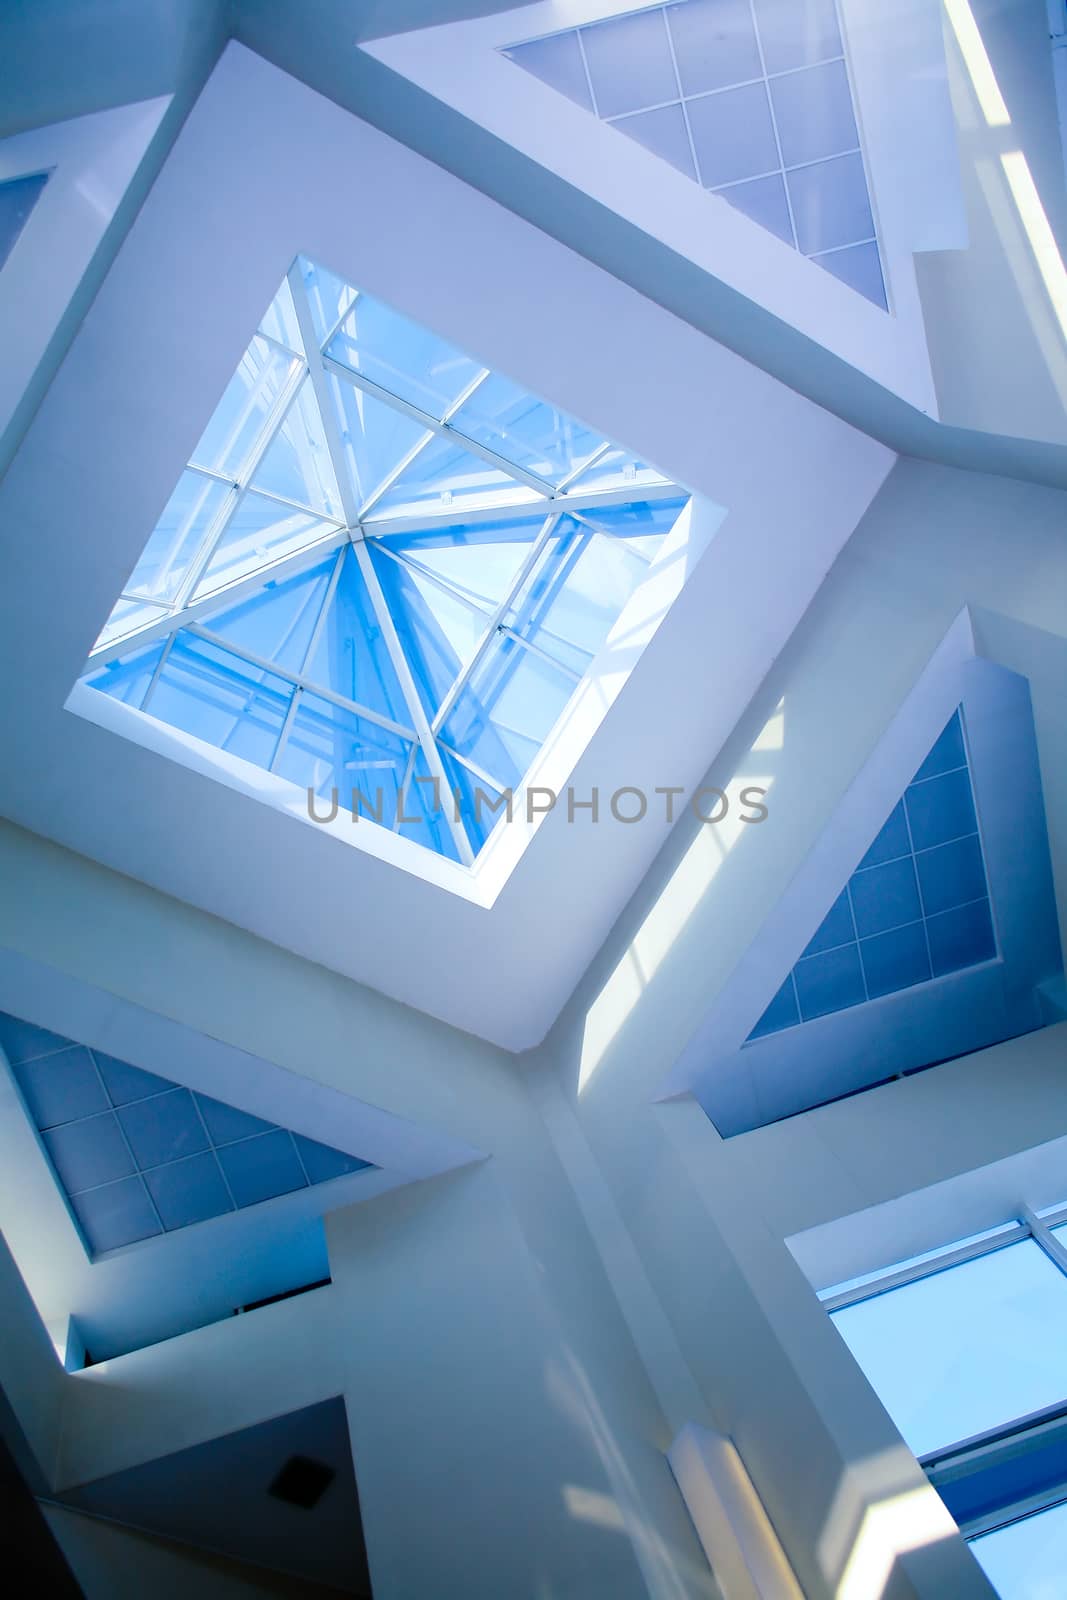 Roof transparent in modern office building 